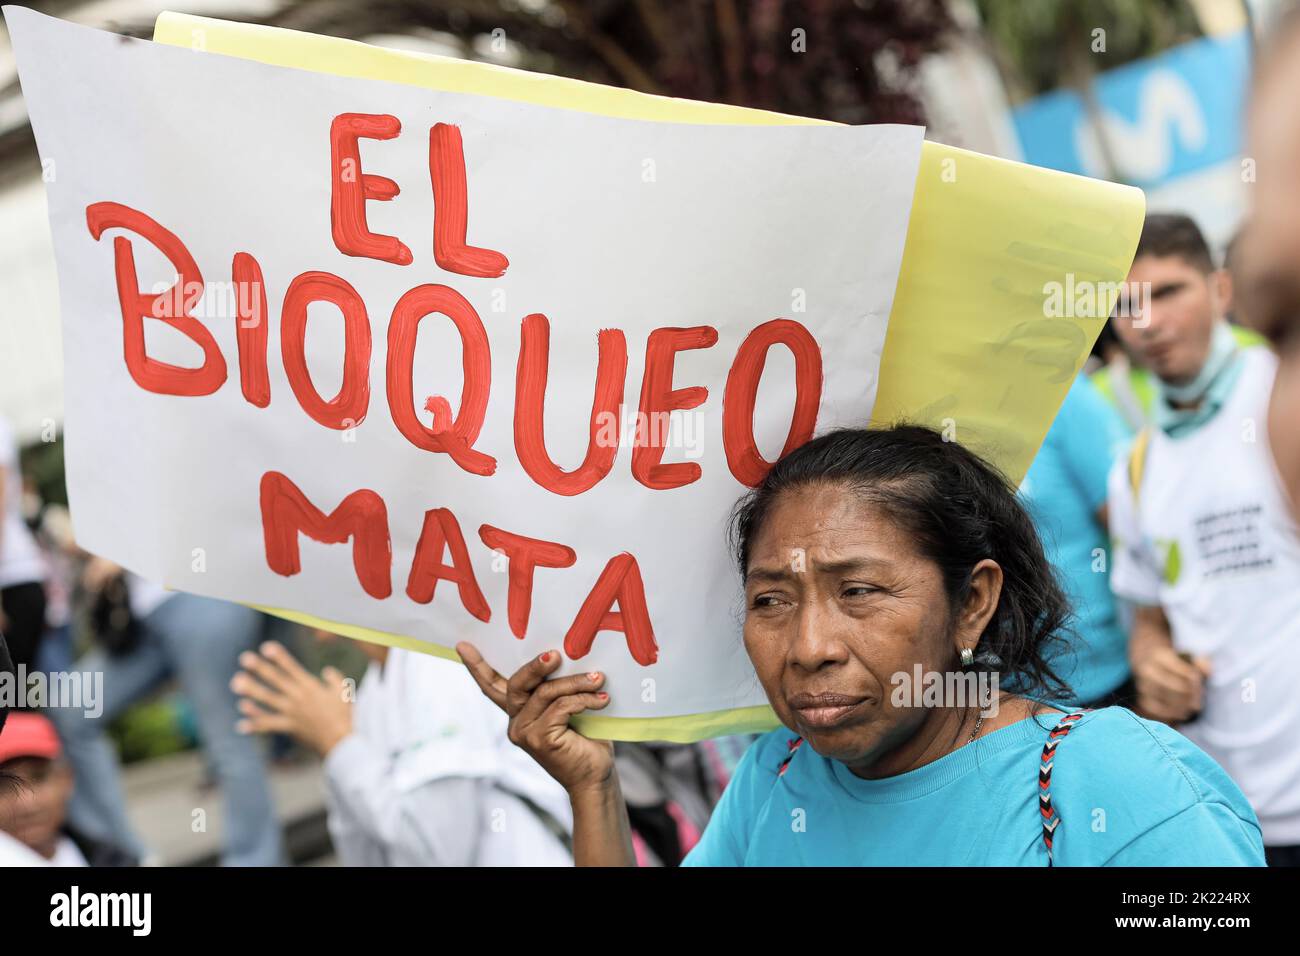 Caracas, Venezuela. 21st Sep, 2022. A woman holds a sign reading in Spanish 'El Bloqueo Mata' (The Blockade Kills) during a demonstration against economic sanctions called by peasant movements in front of the UN Mission in Caracas, Venezuela. Credit: Jesus Vargas/dpa/Alamy Live News Stock Photo